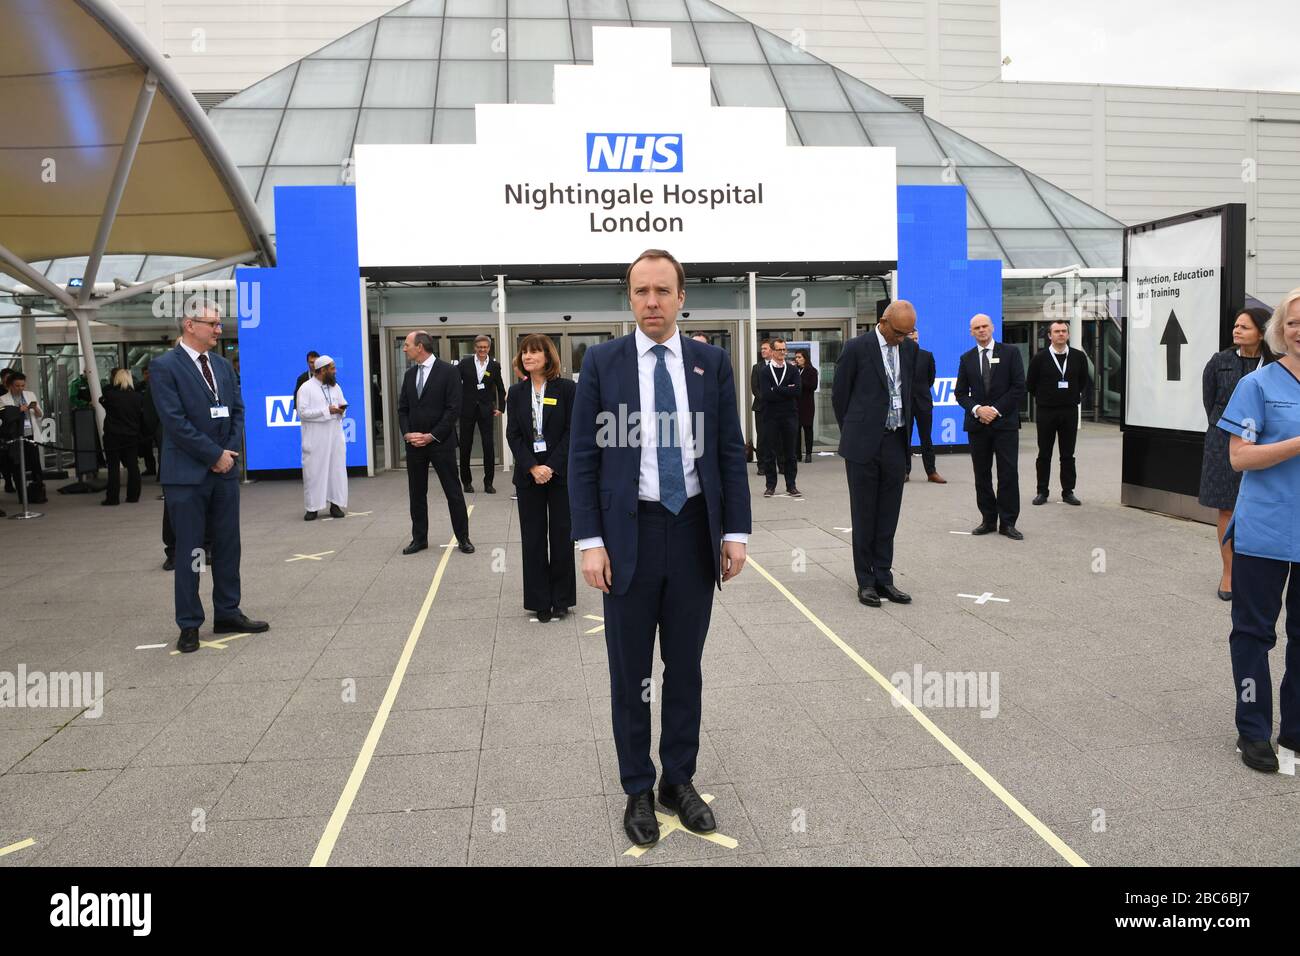 Health Secretary Matt Hancock and NHS staff stand on marks on the ground, put in place to ensure social distancing guidelines are adhered to, at the opening of the NHS Nightingale Hospital at the ExCel centre in London, a temporary hospital with 4000 beds which has been set up for the treatment of Covid-19 patients. Stock Photo